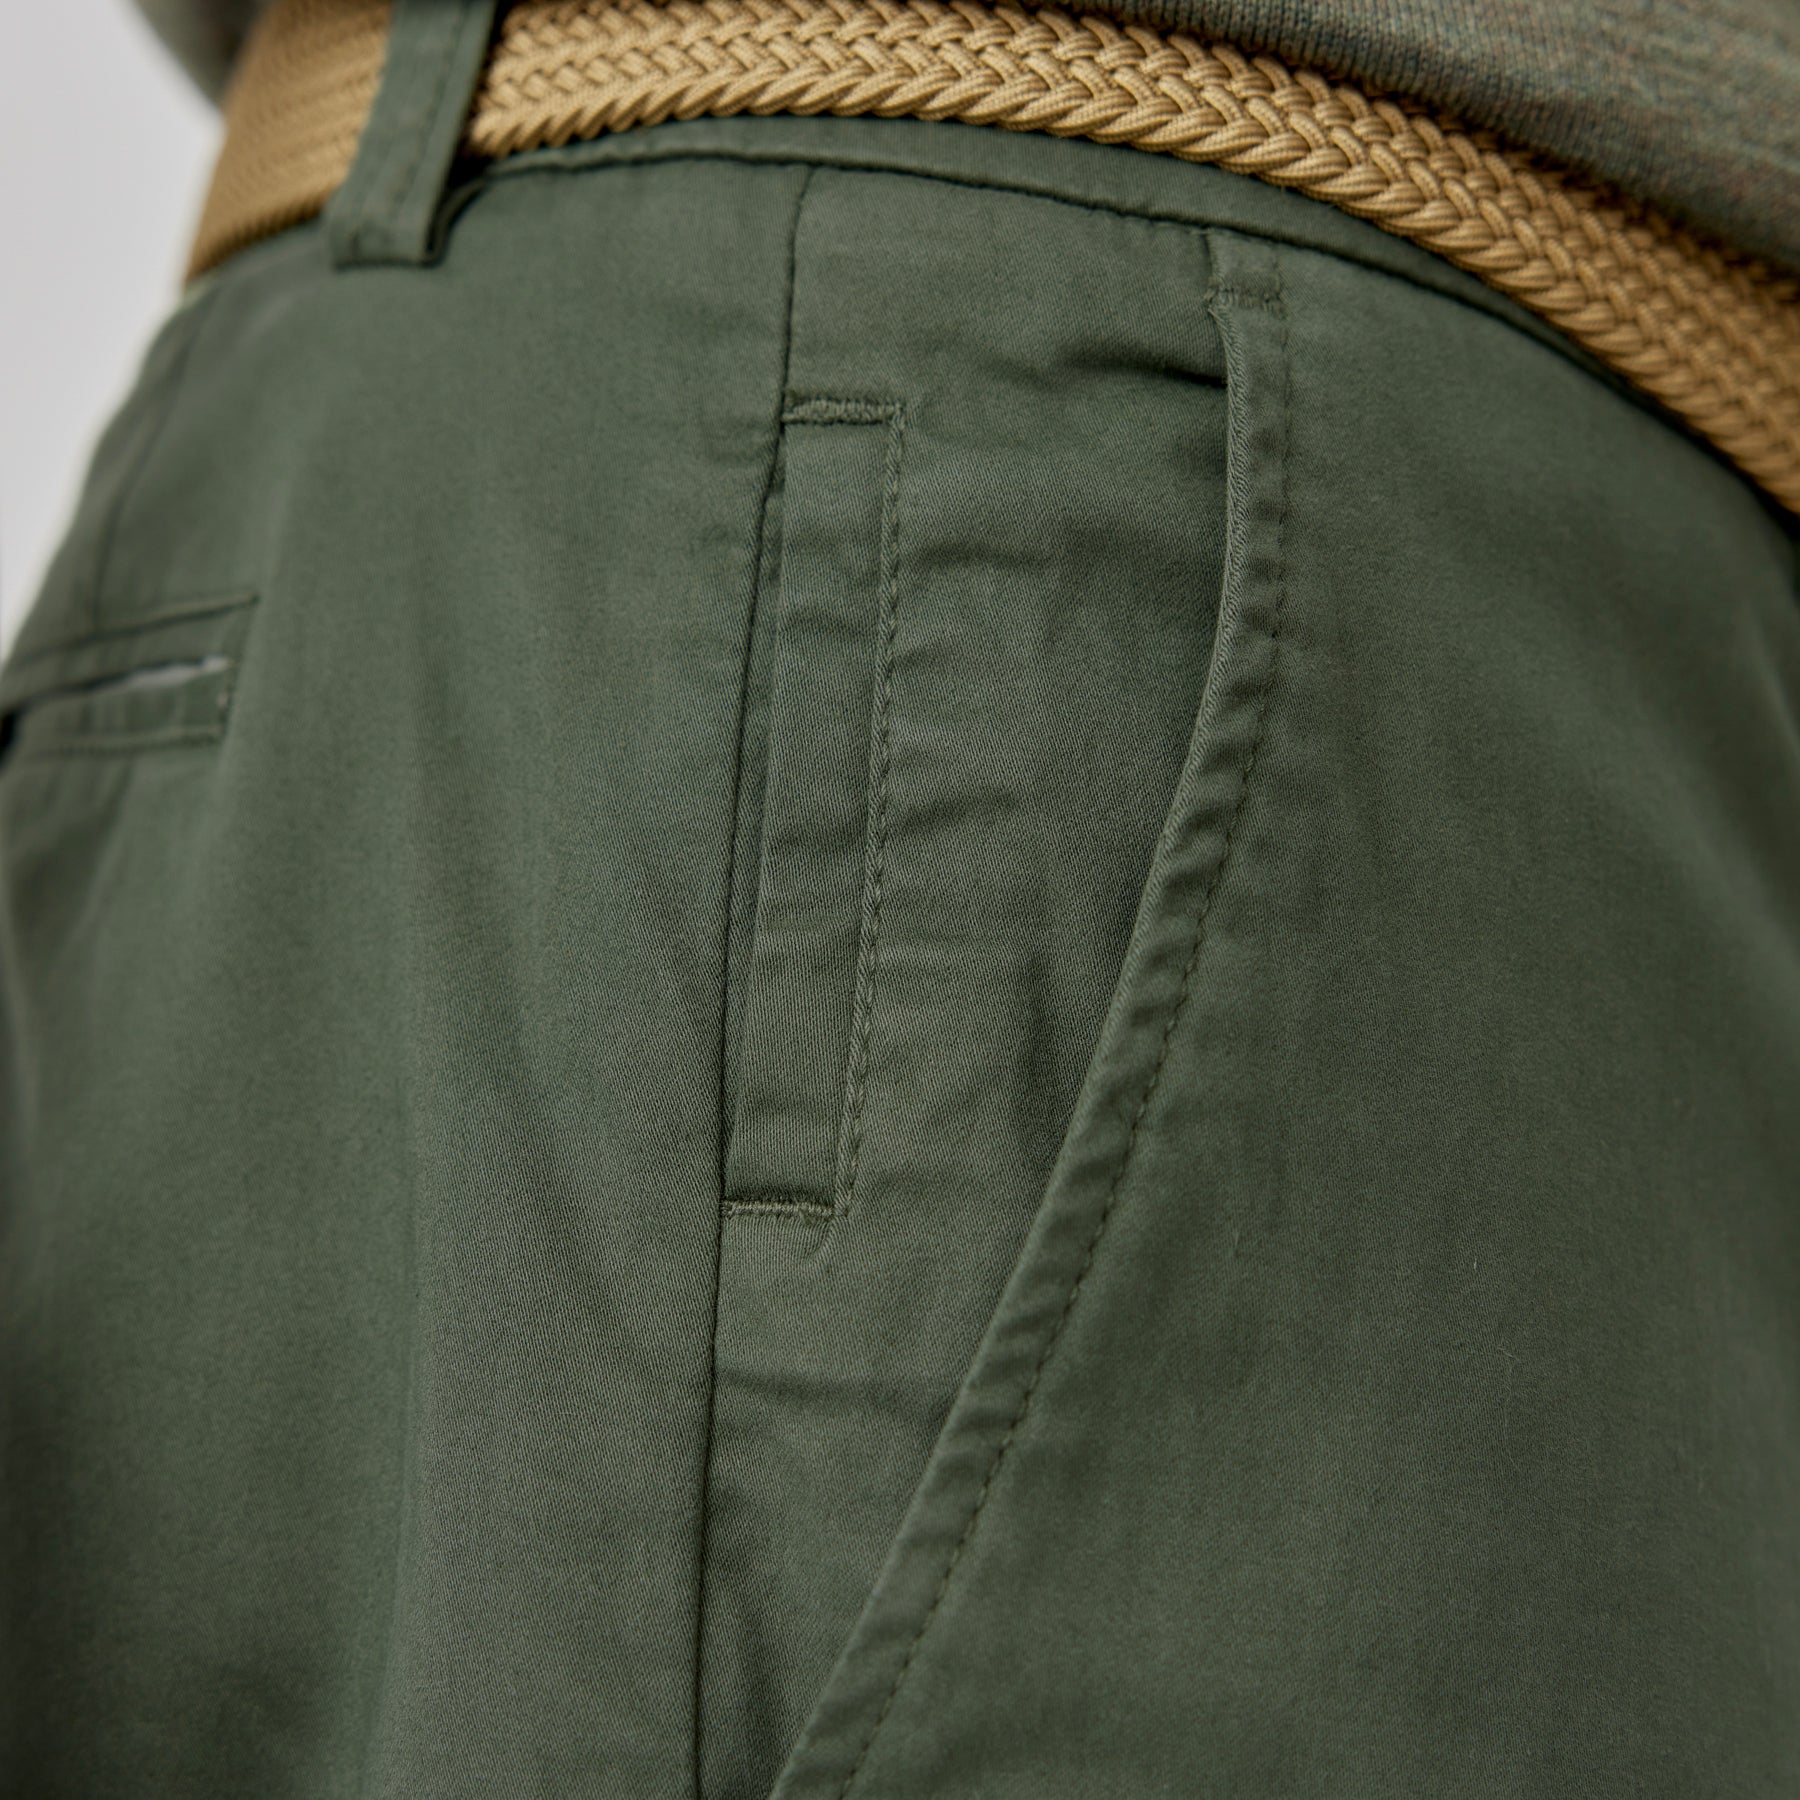 AspennigeriaShops - Olive Green - Men's chino pants in linen and